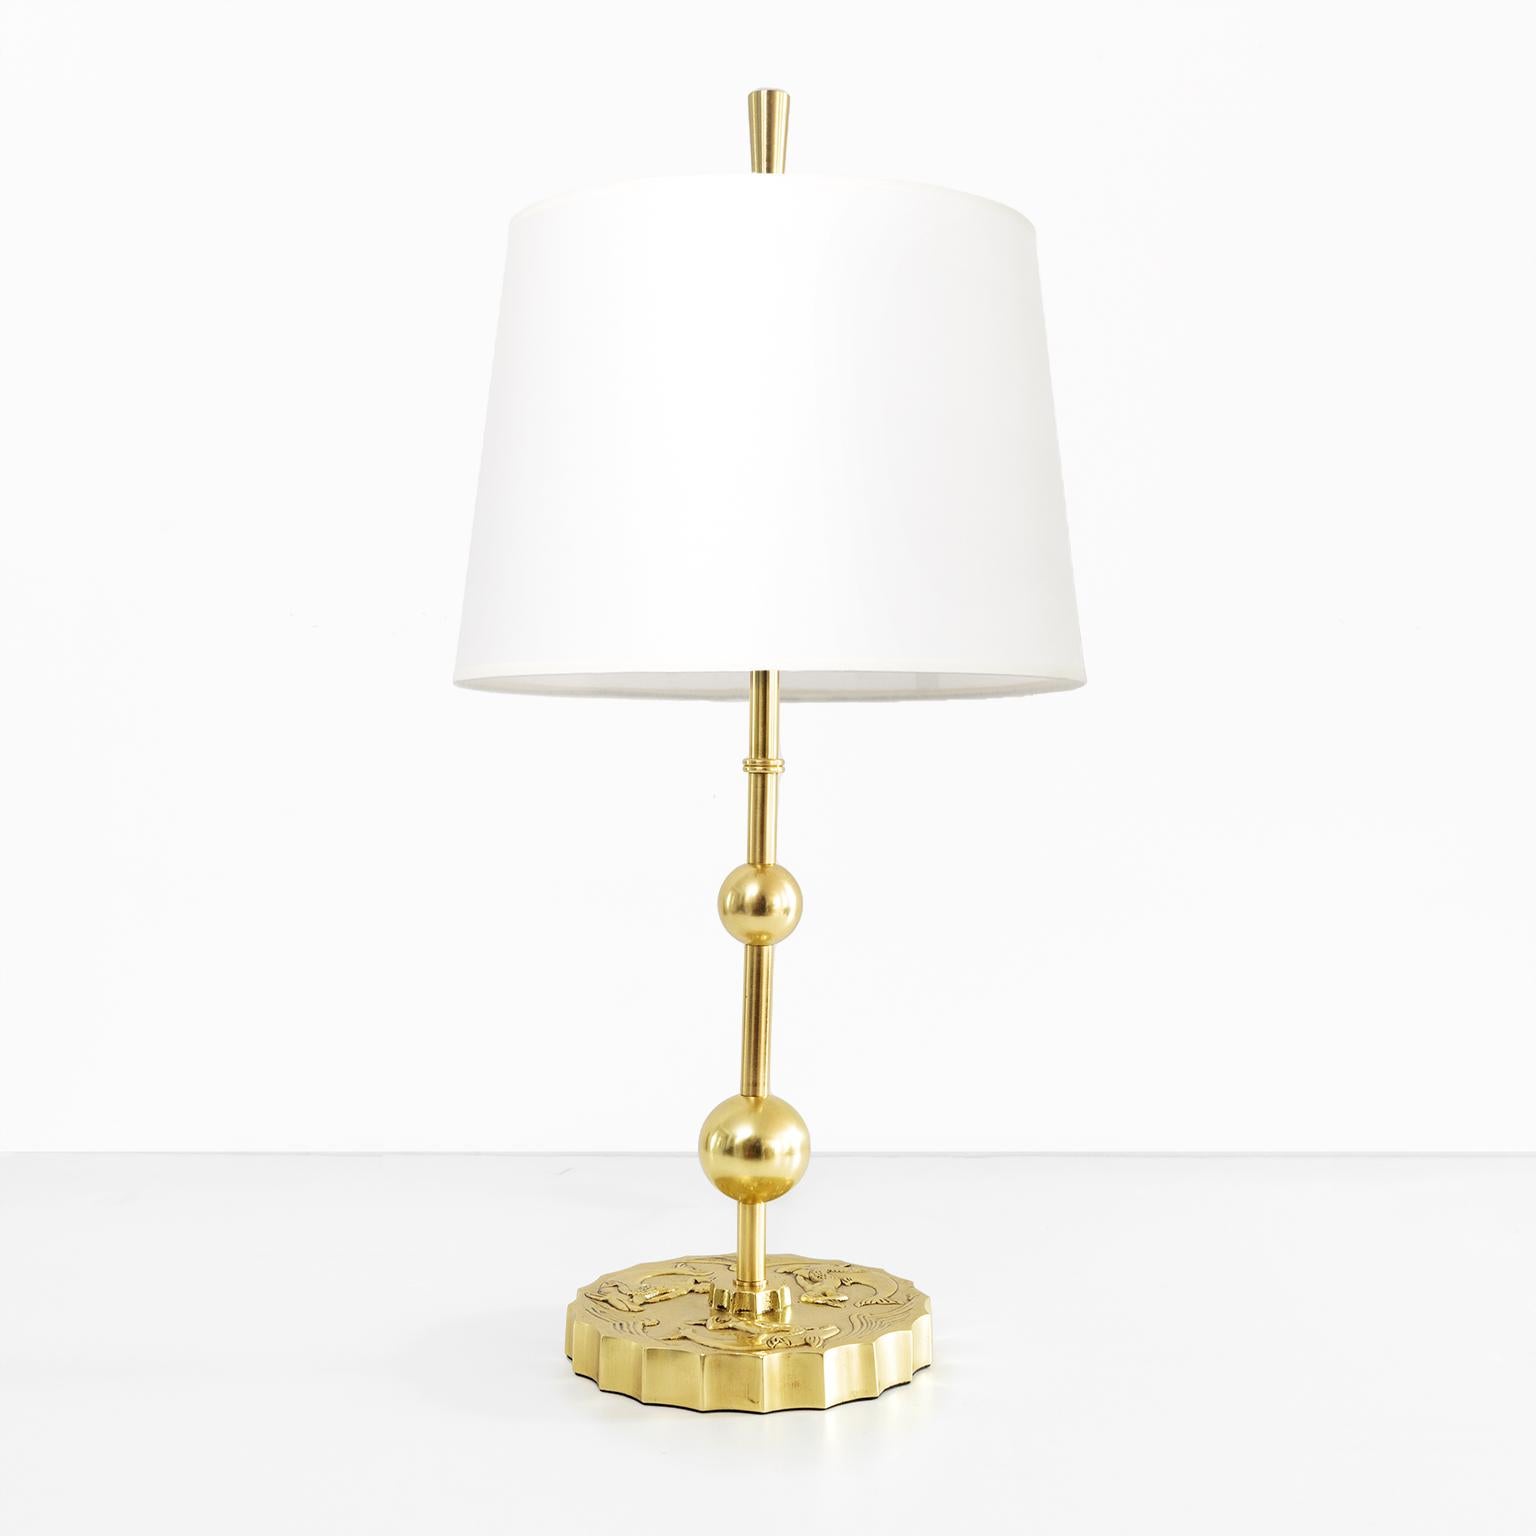 A Swedish Grace, Art Deco table lamp in polished brass. The rounded base has a relief of mermaids ridding dolphins in the a sea. Two brass spheres rise above on a brass stem which meet a double socket cluster. Newly restored, rewired for use in the